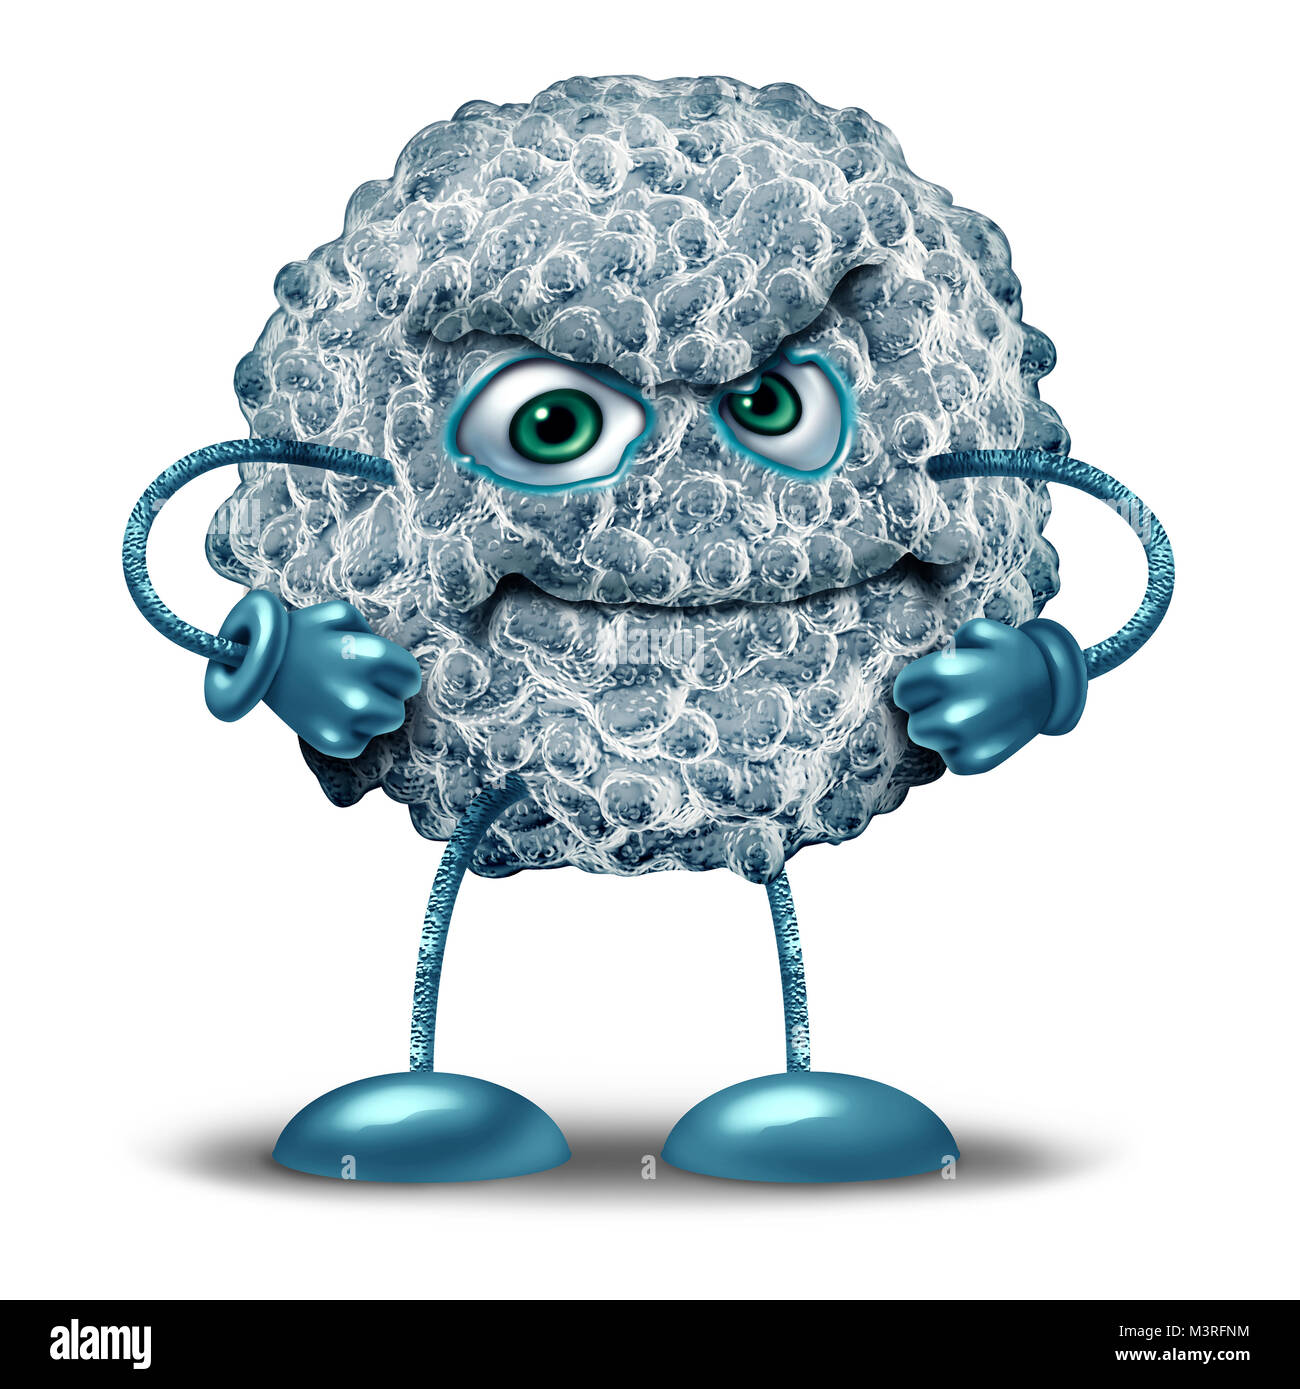 White blood cell character as a microbiology symbol of the human immune system fighting off infections defending and protecting. Stock Photo